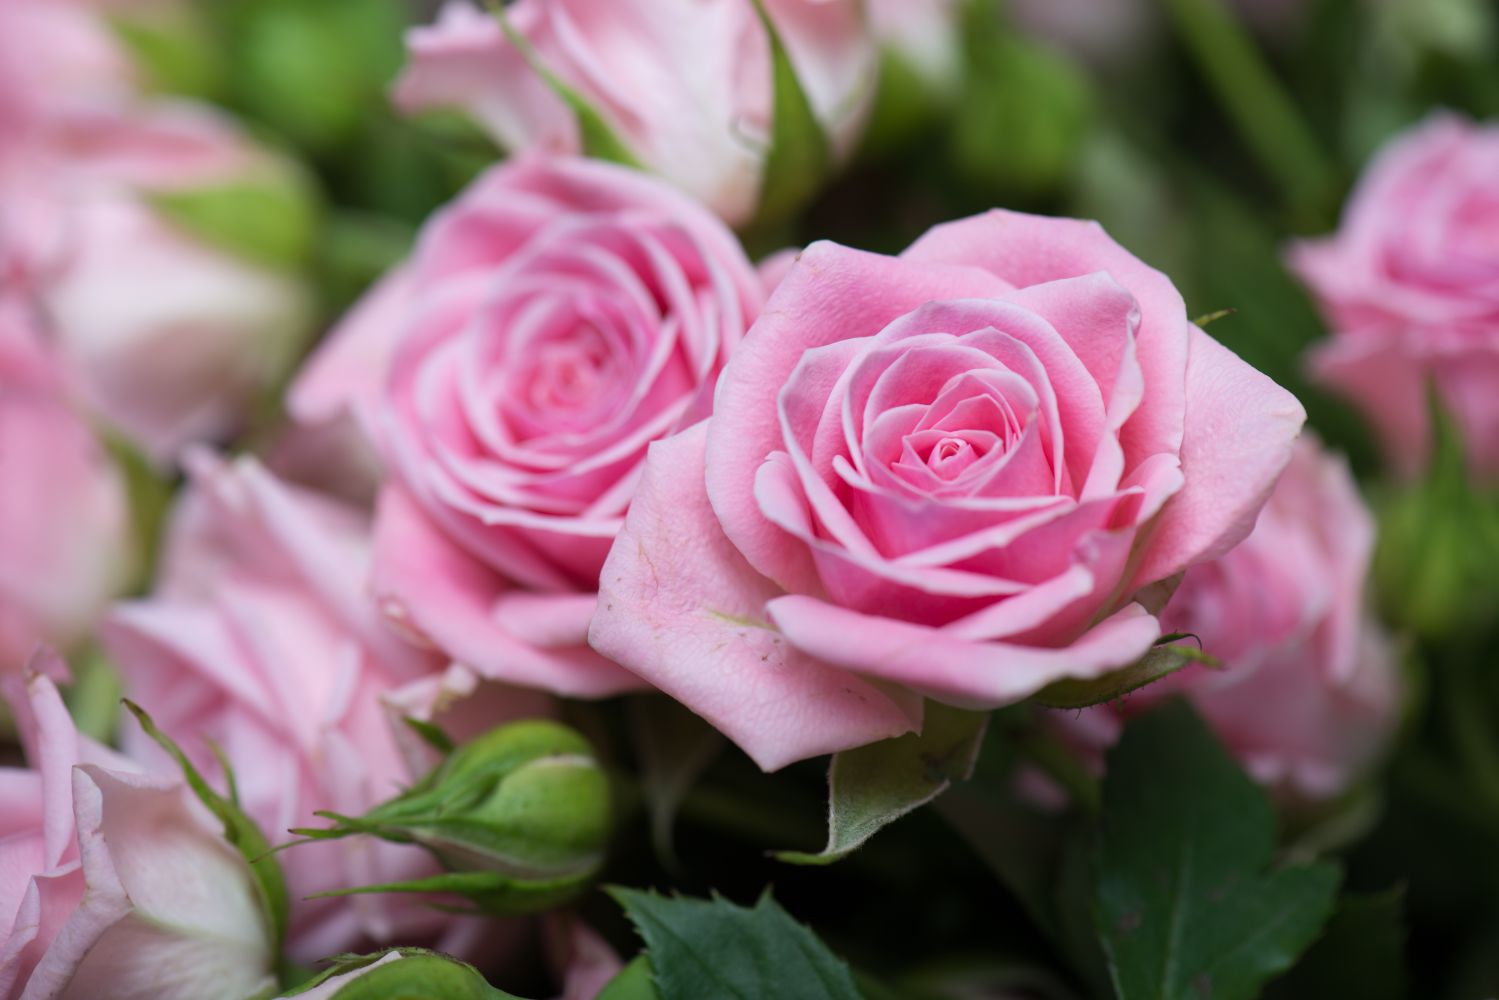 The most beautiful pink roses - Plantura